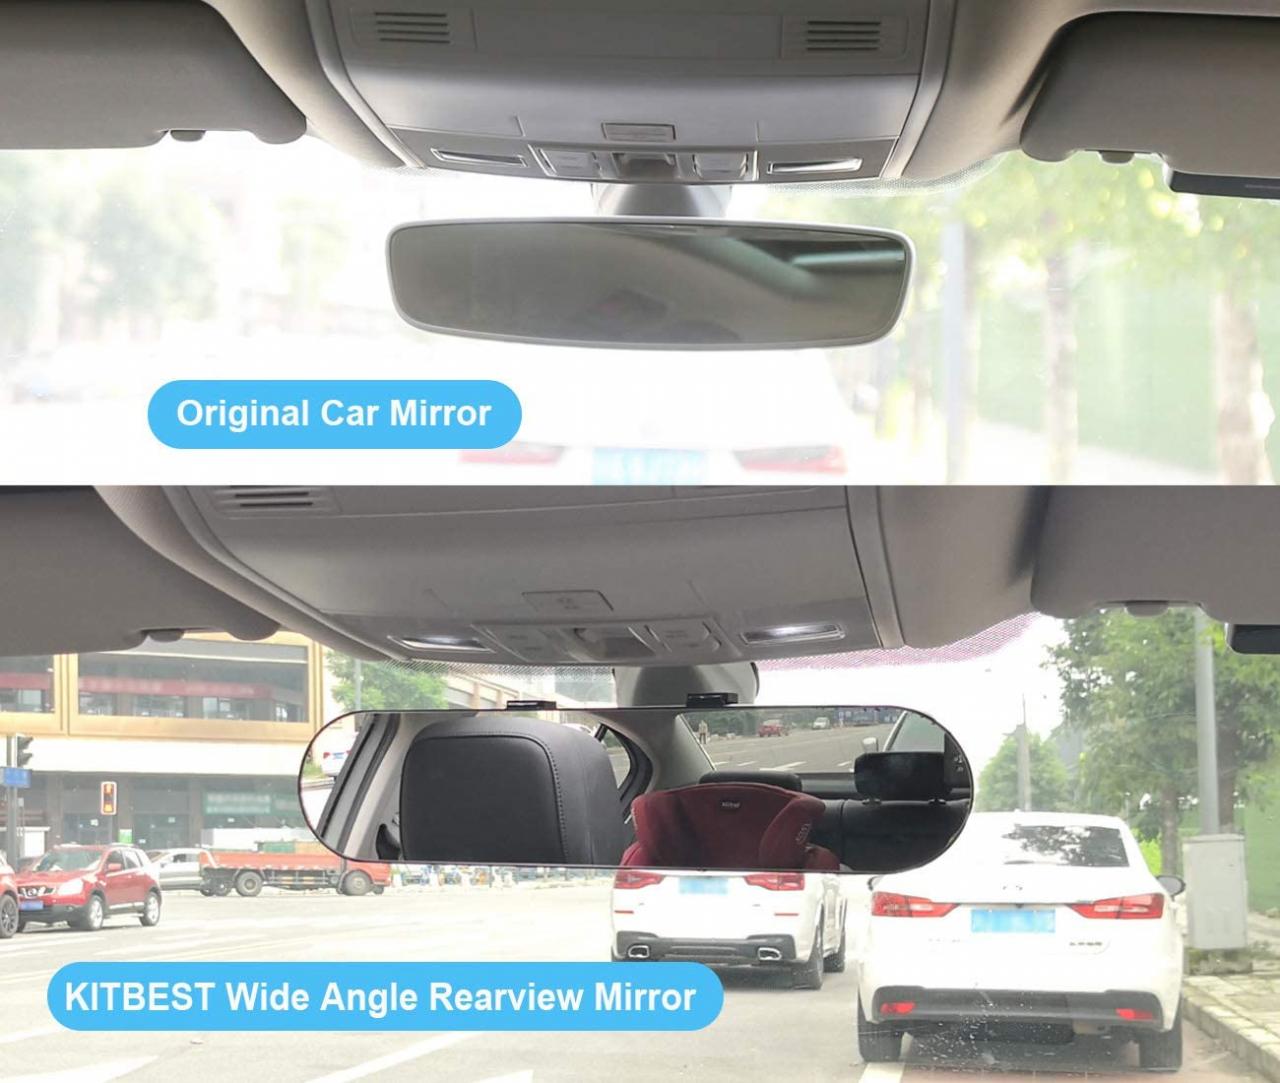 Buy KITBEST Rear View Mirror 11.8, Wide Angle Rear View Mirror, Universal  Panoramic Rearview Mirror, Convex Car Interior Mirror to Reduce Blind Spot  Effectively for Cars SUV Trucks (11.8” L x 2.7”